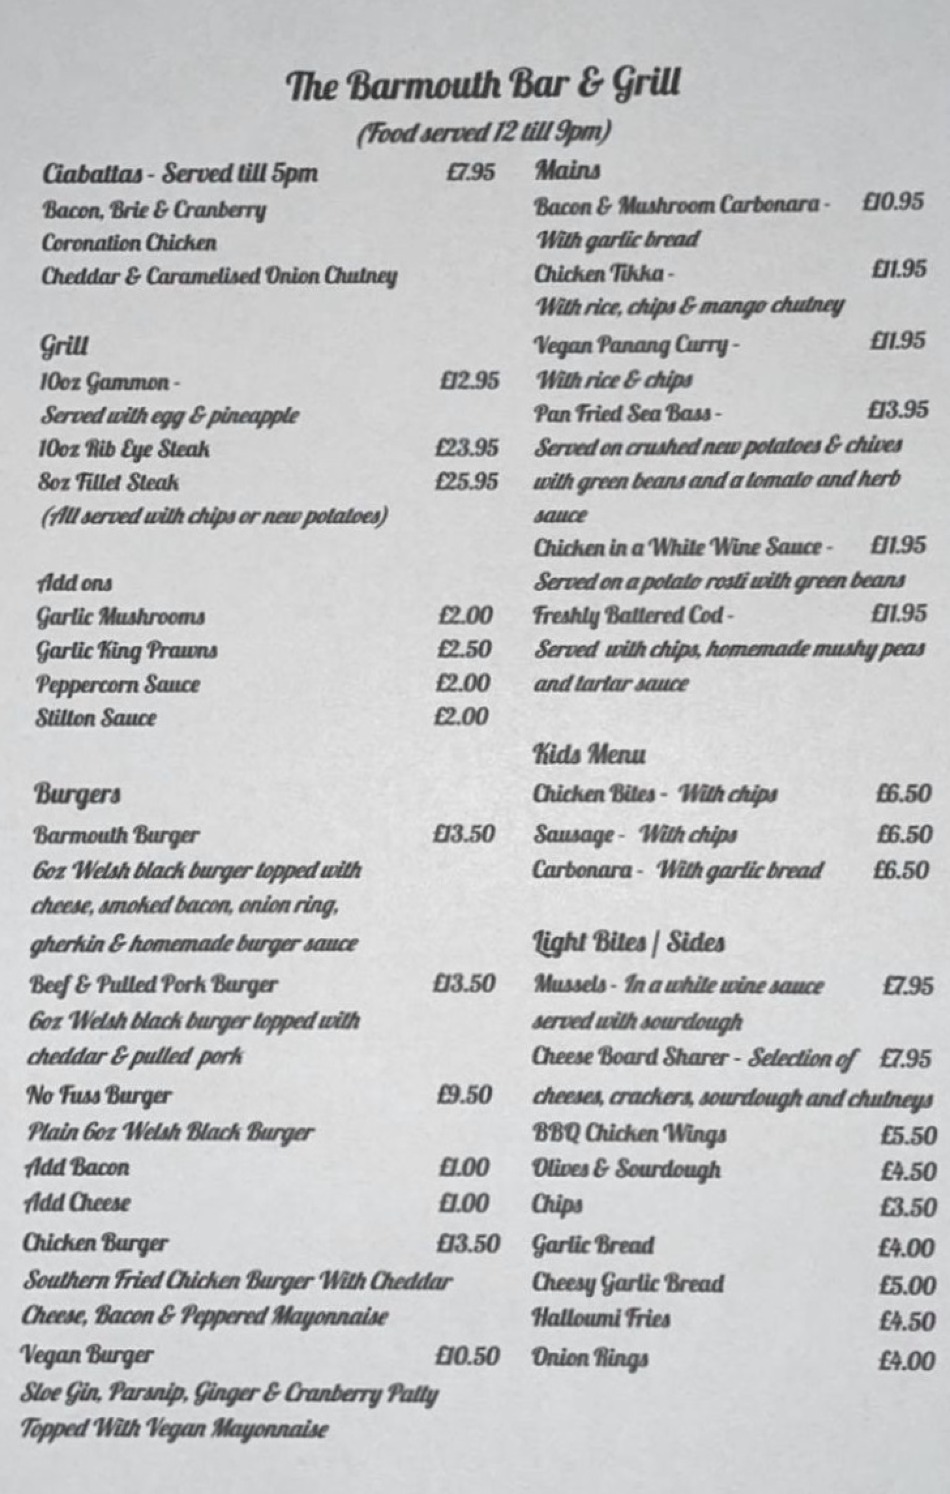 Takeaway Restaurant Menu Page - Barmouth Bar & Grill Freehouse - Barmouth